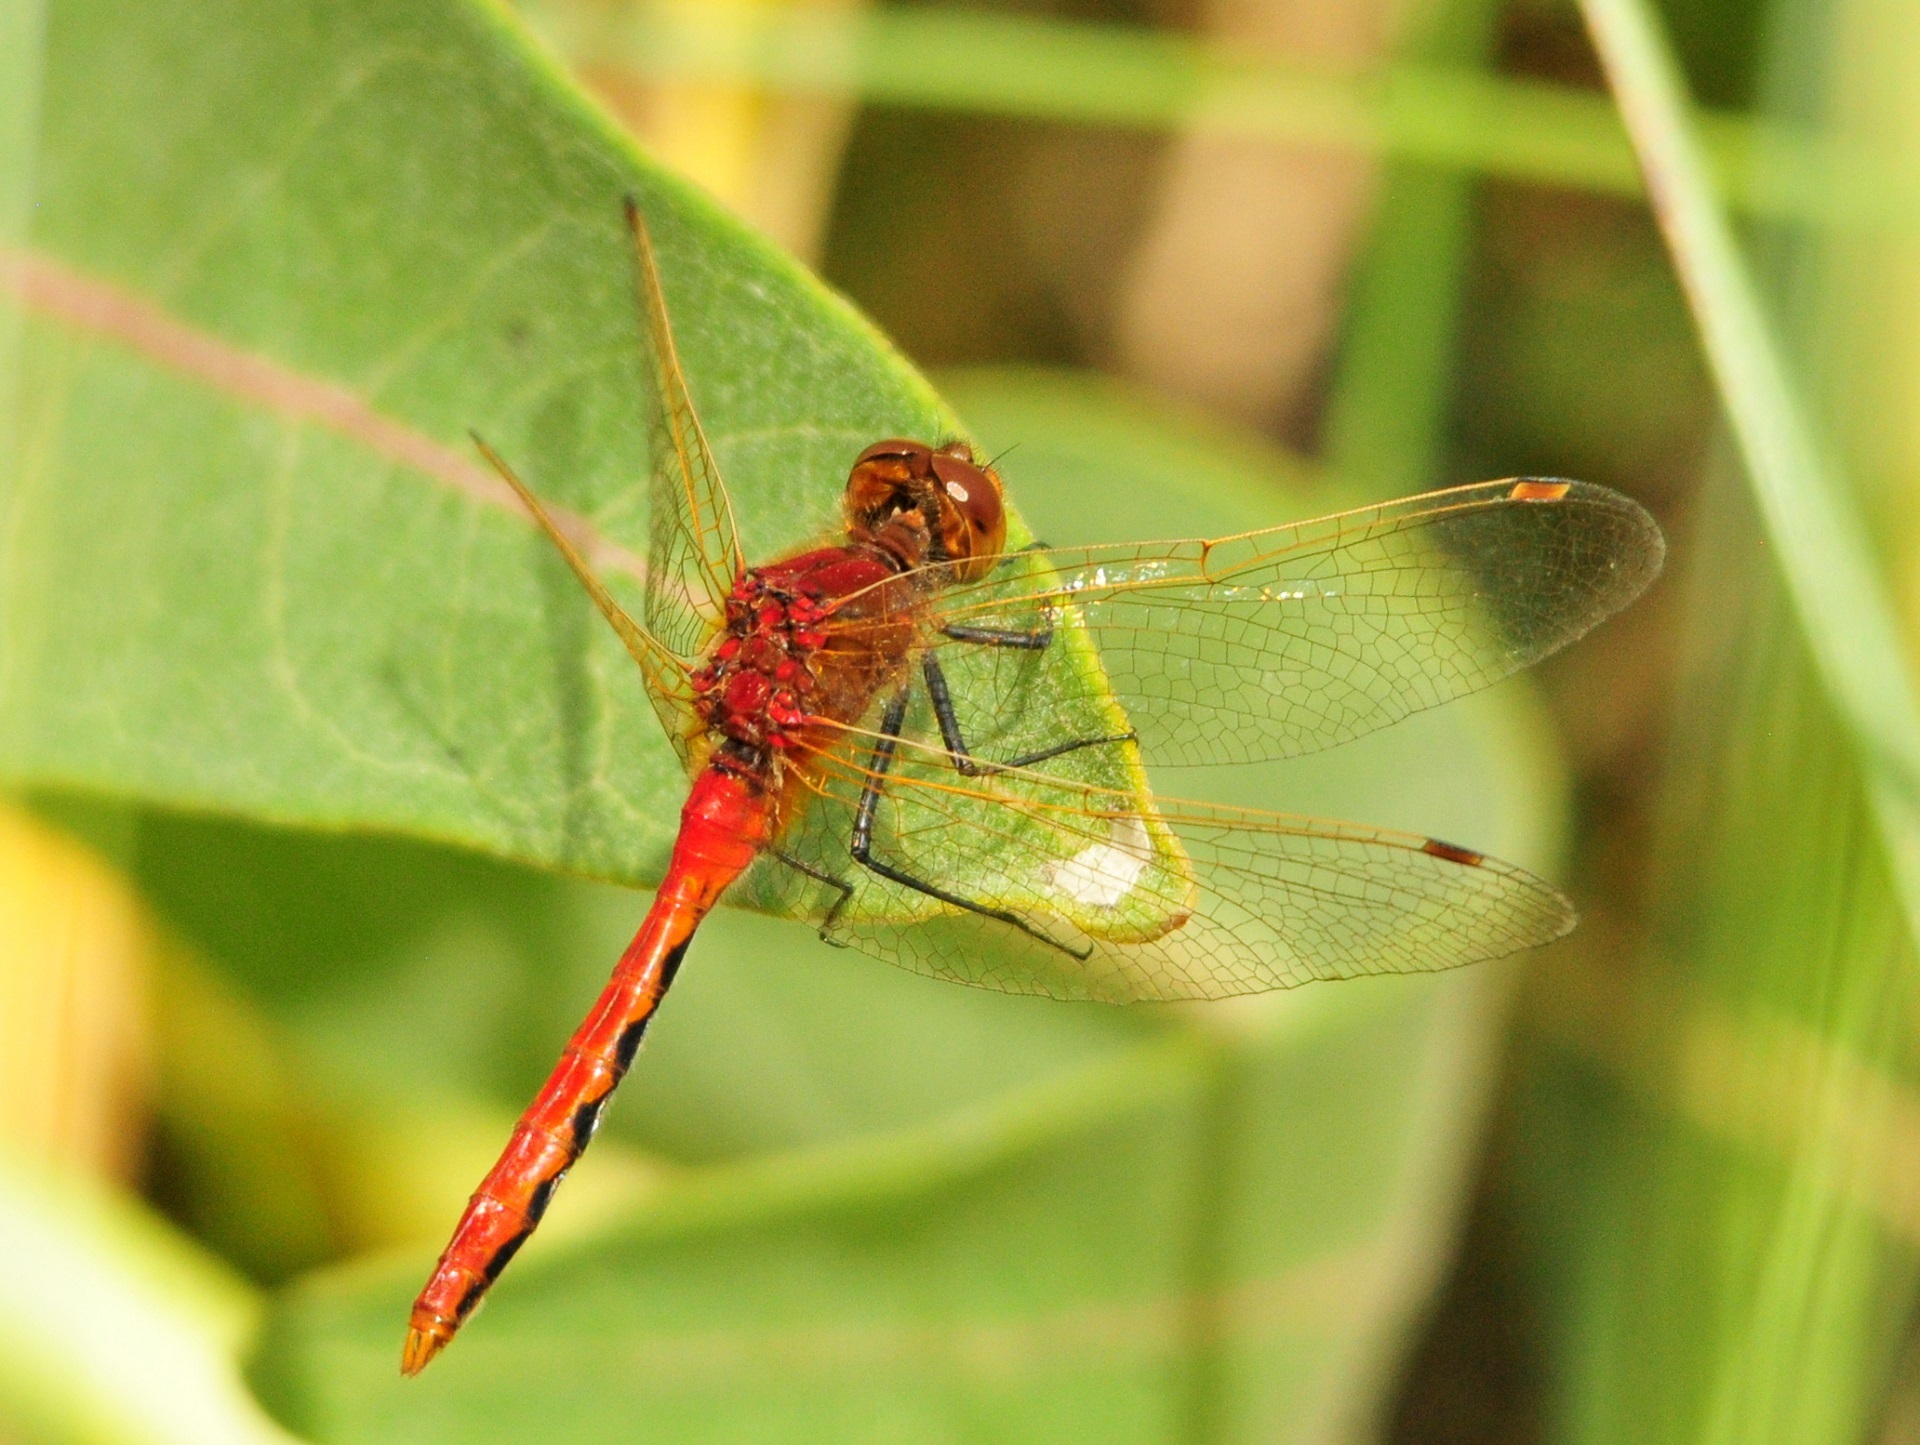 Dragonfly on the leaf photo